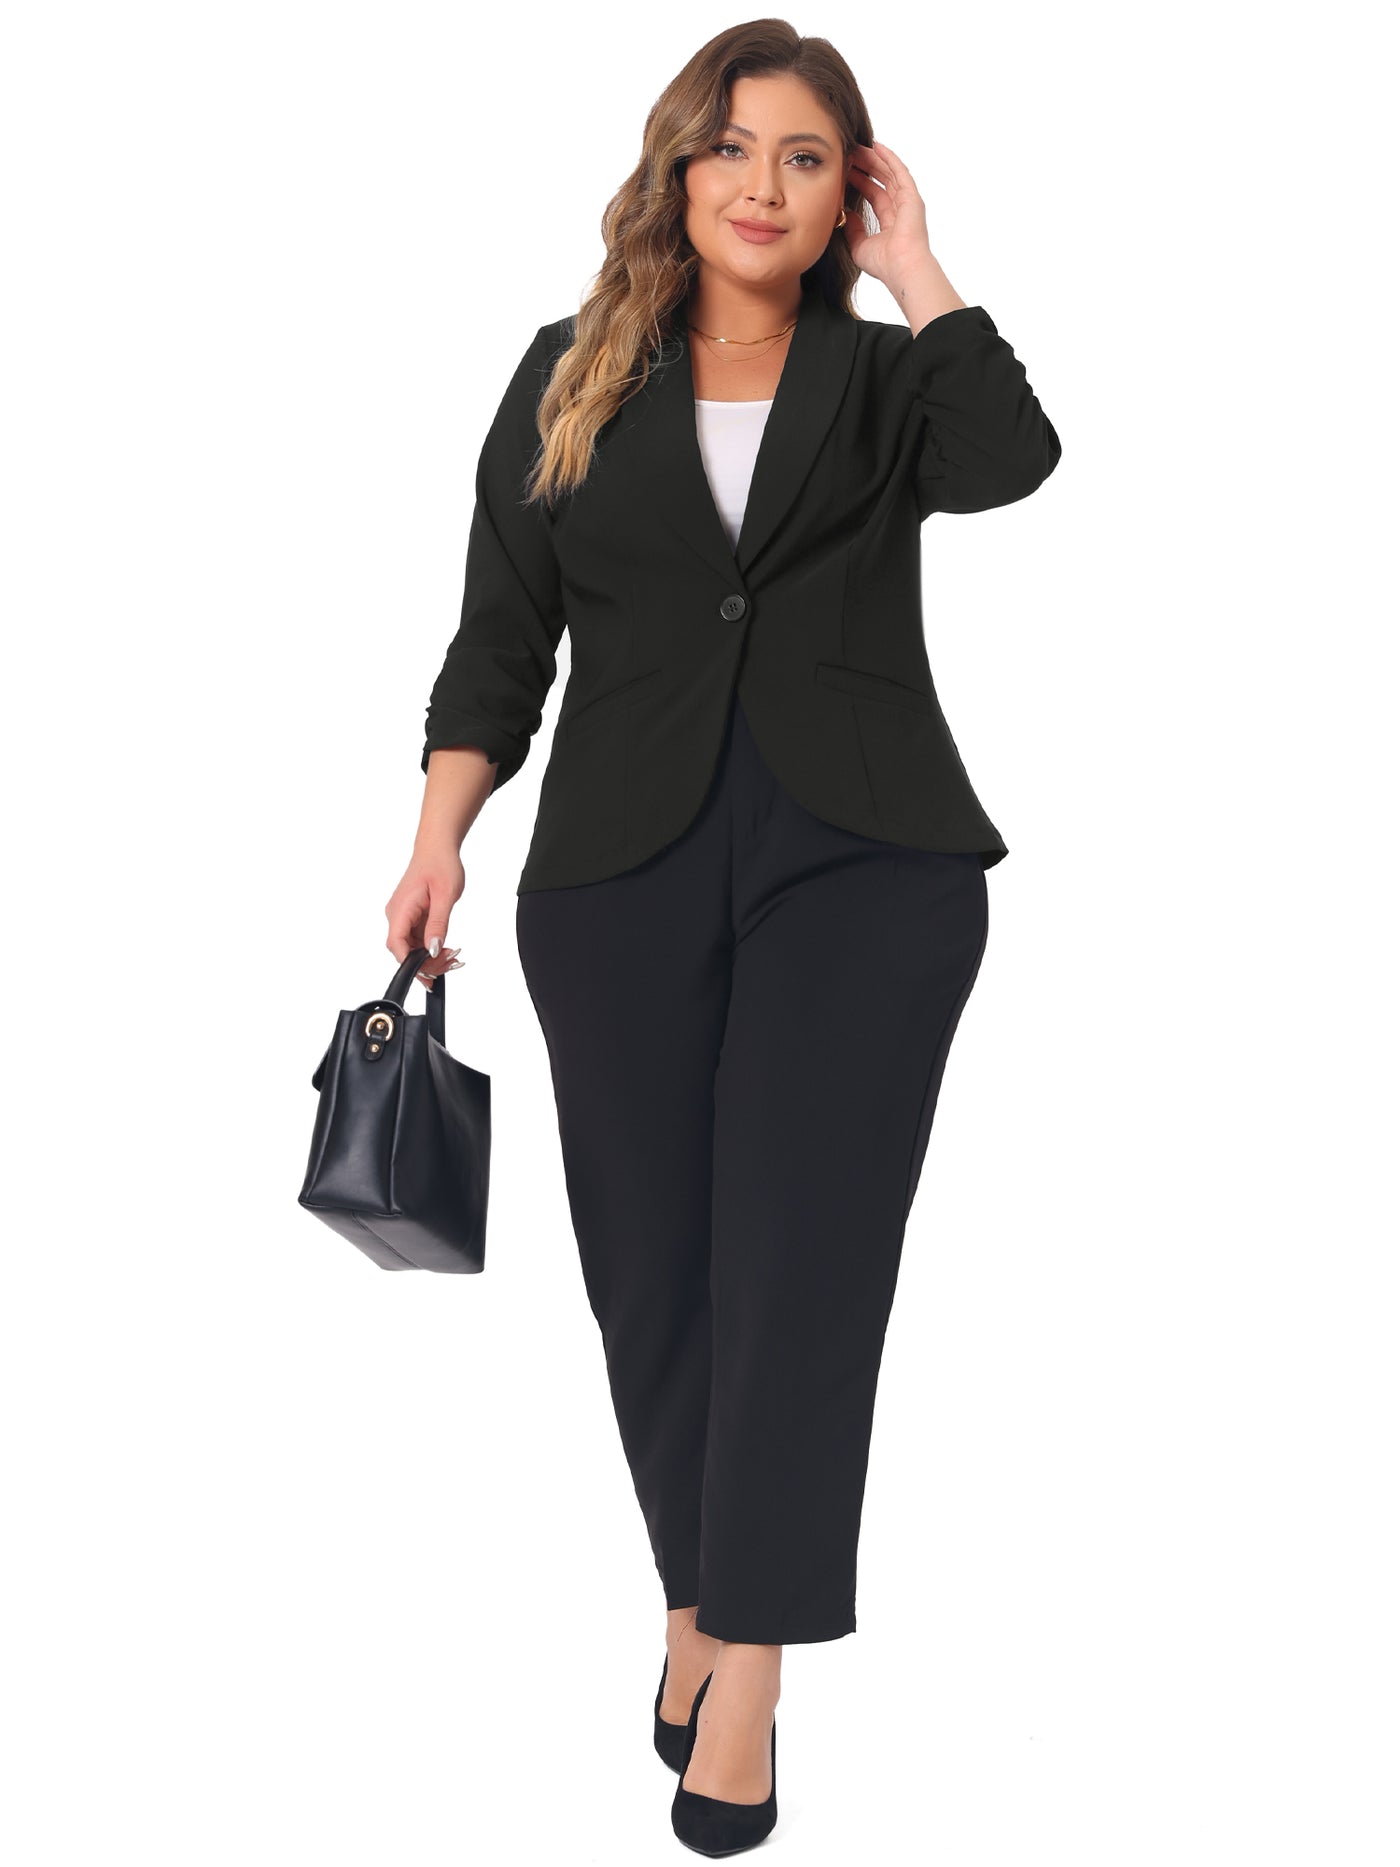 Bublédon Plus Size Blazer for Women 3/4 Ruched Sleeve Open Front Lightweight Work Office Suit Jacket